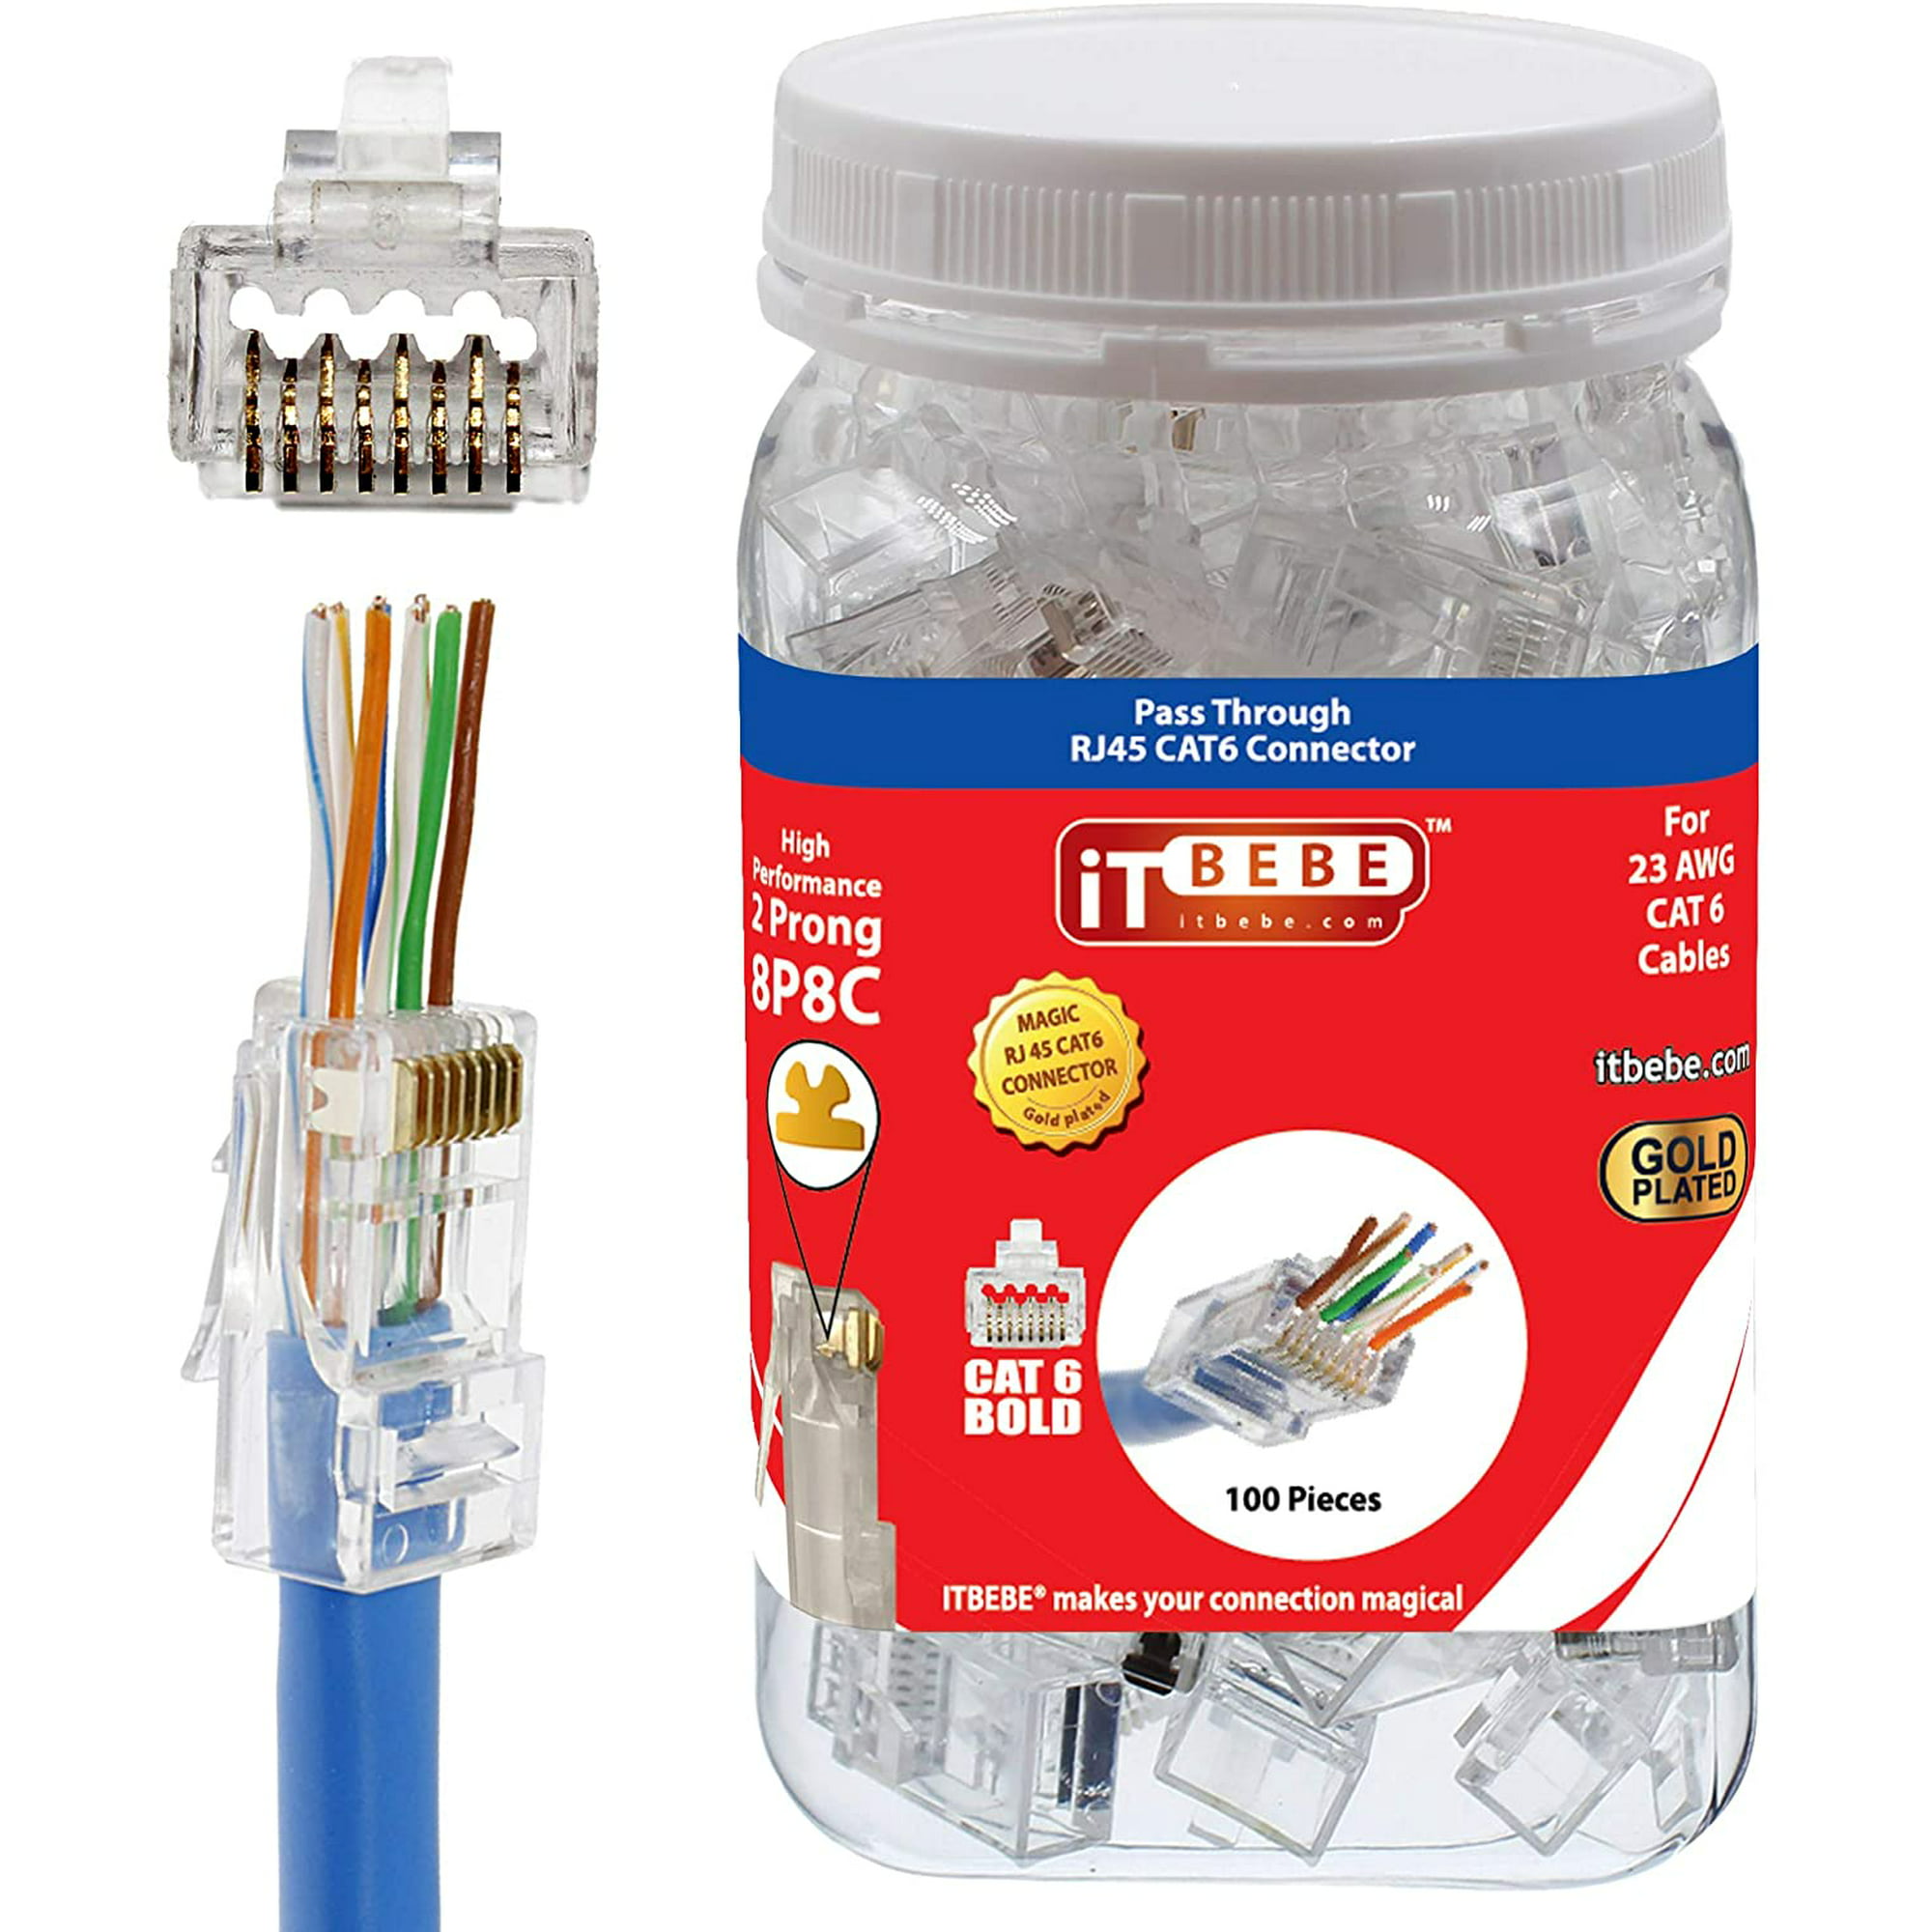 Itbebe Gold Plated Rj45 Cat6 Bold 100